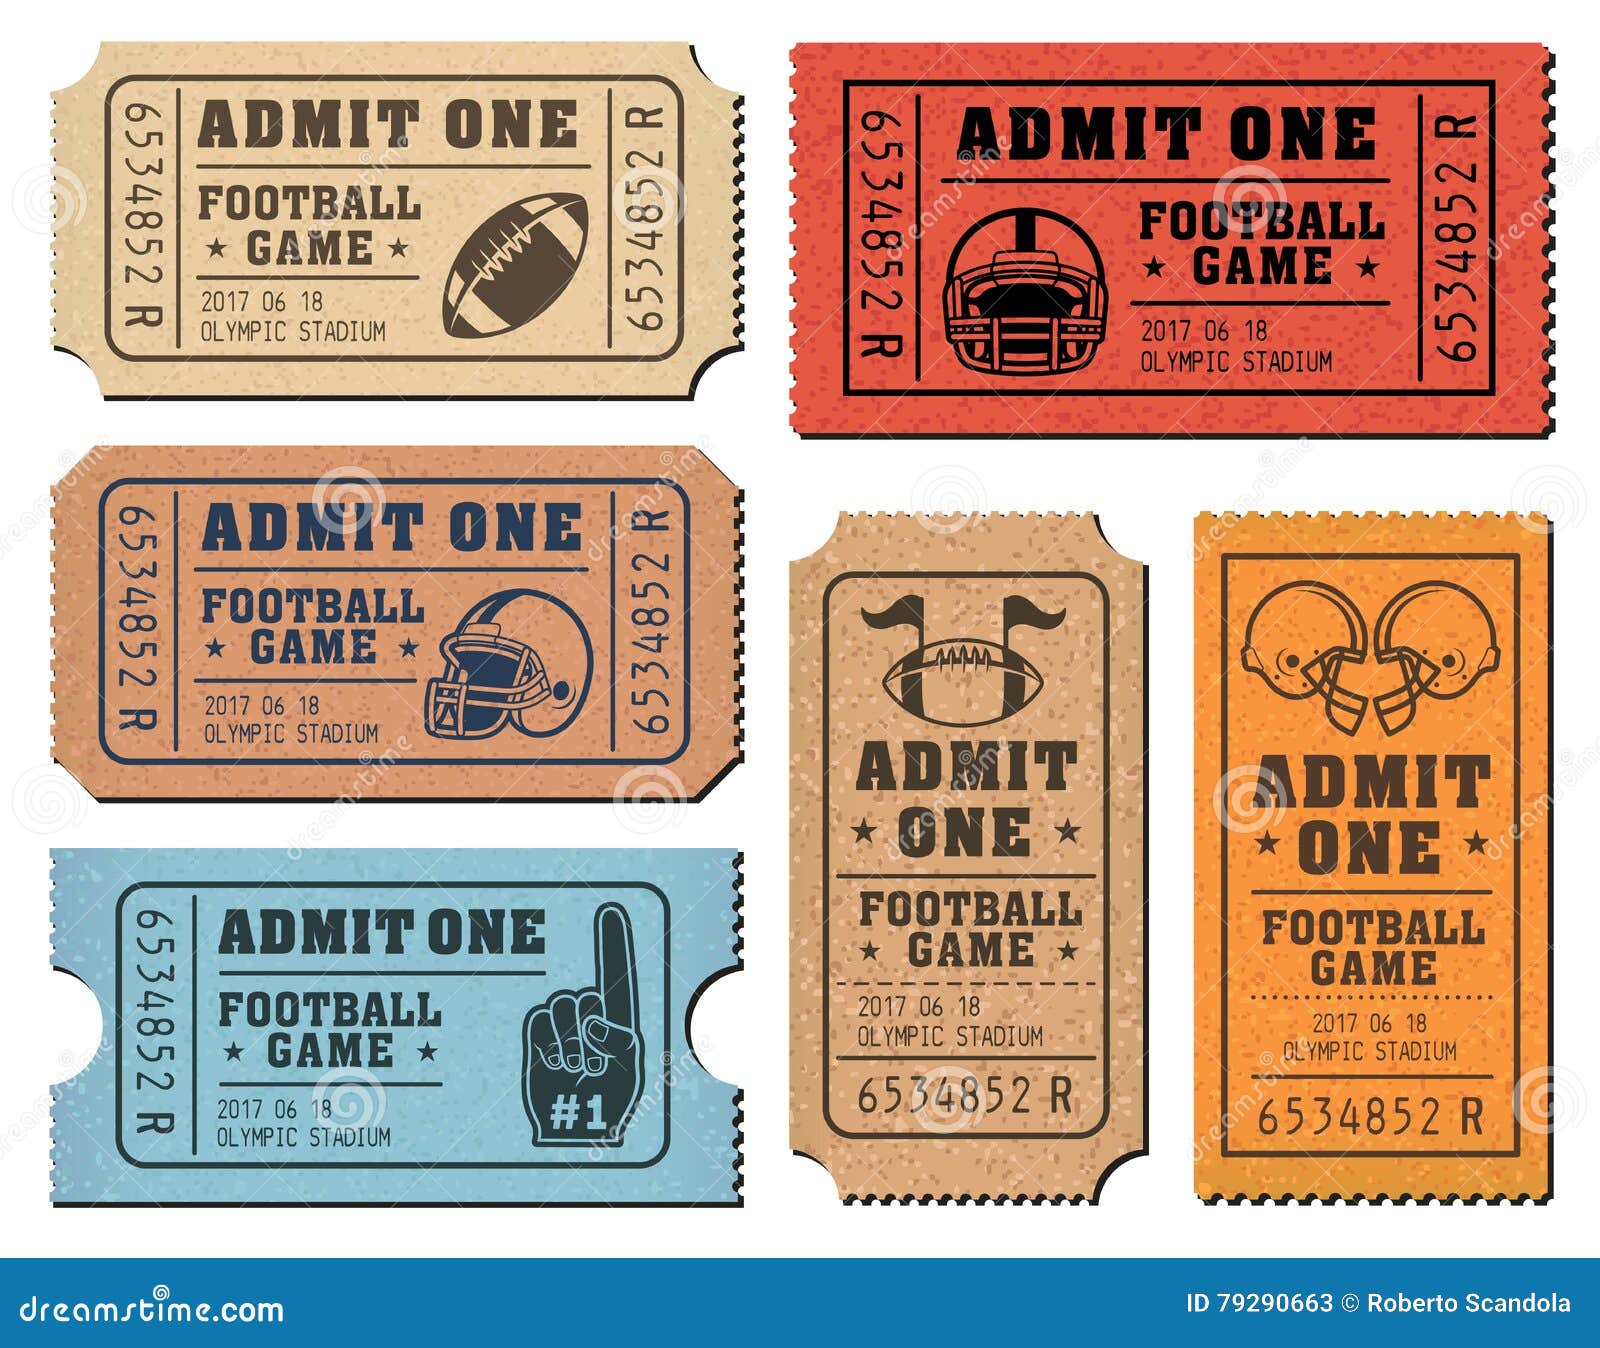 20+ Baseball Ticket Templates - Free PSD, AI, Vector EPS Format Download